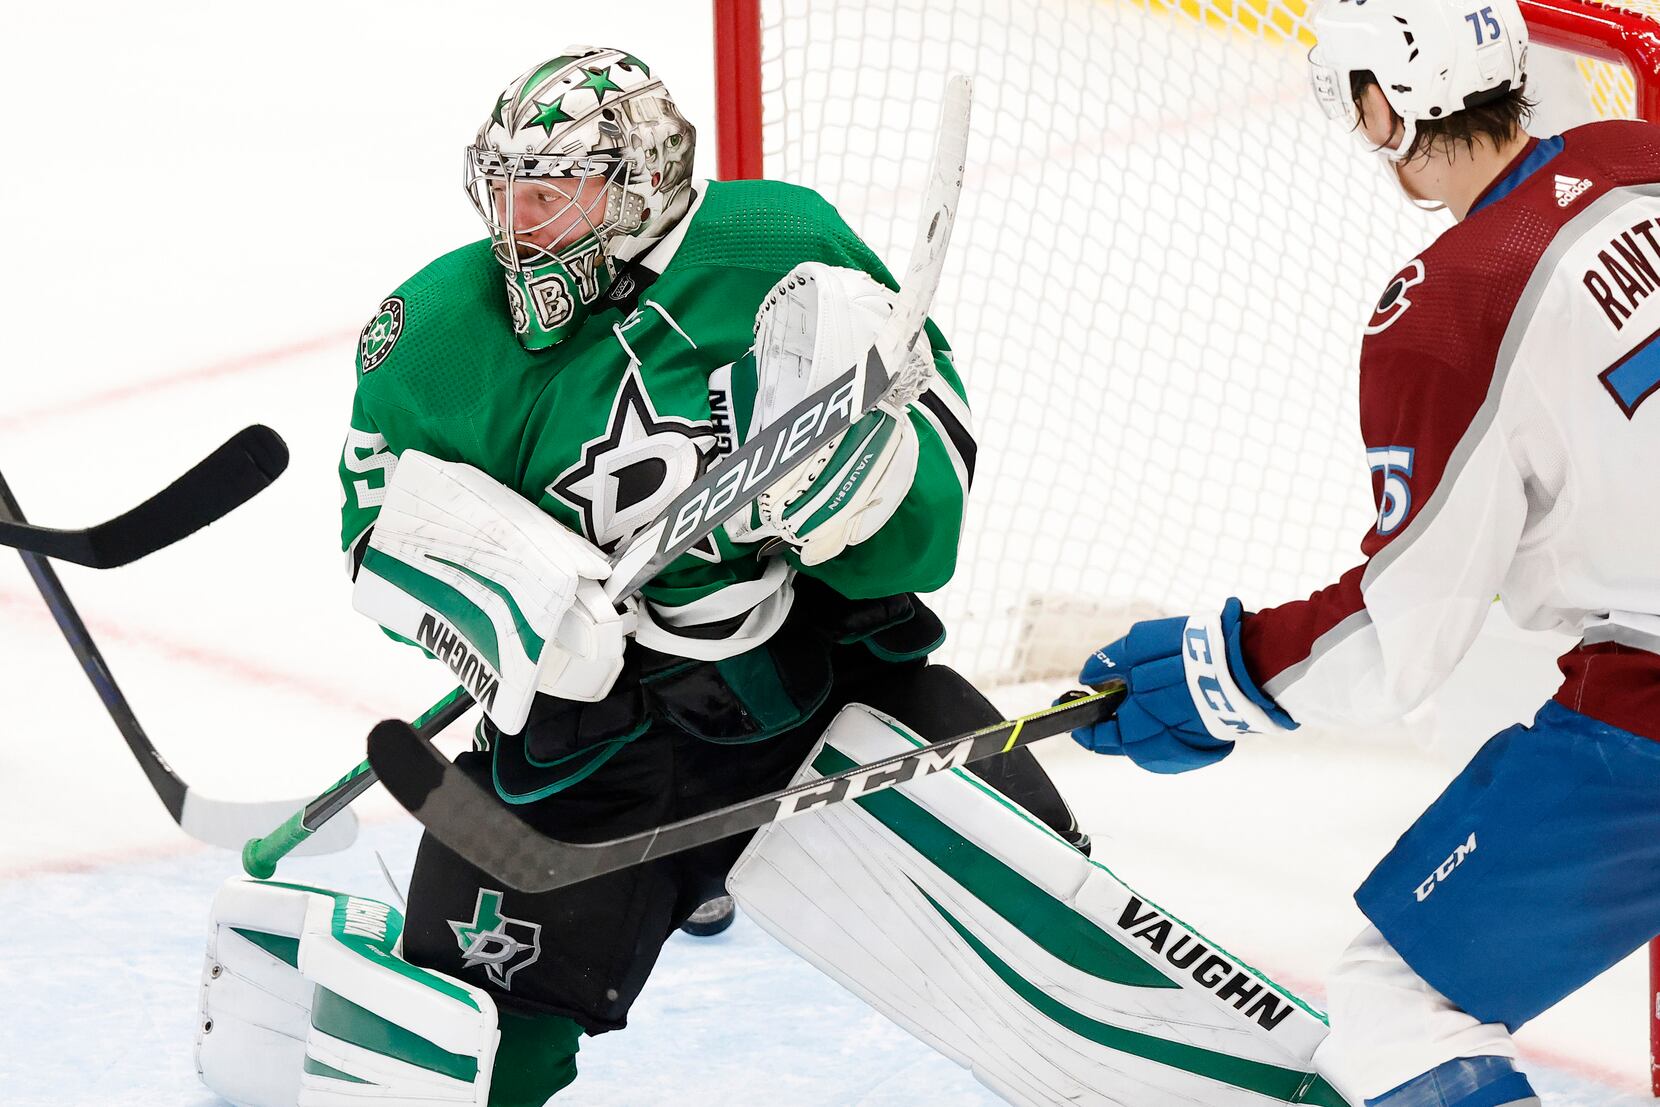 Suddenly, the Avalanche have not 1 but 2 red-hot goaltenders